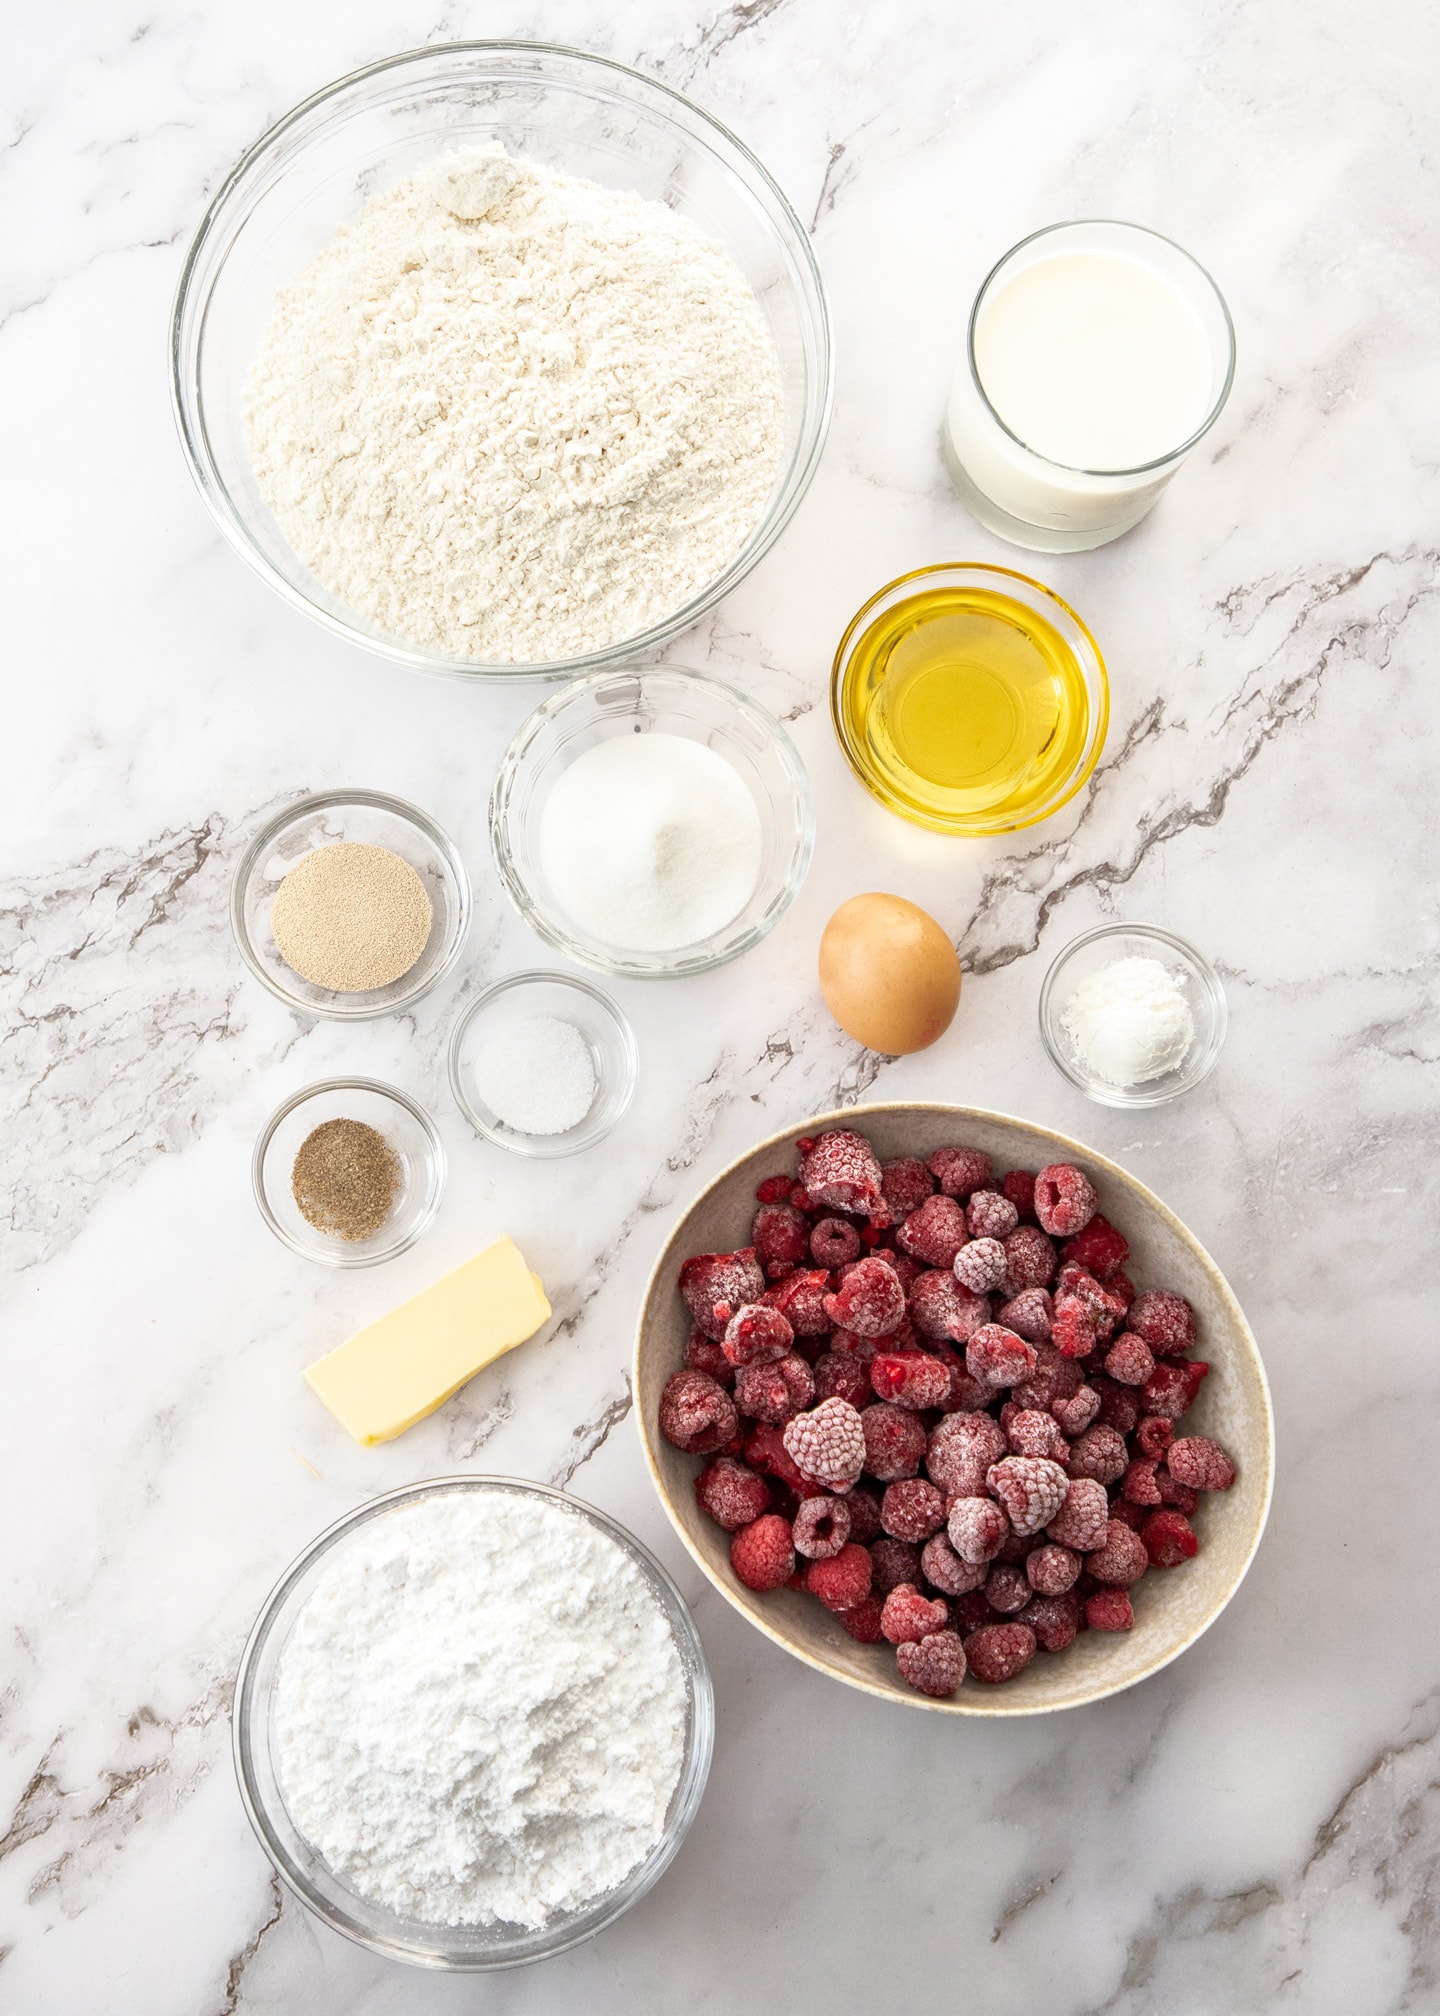 Ingredients for raspberry sweet rolls on a marble surface.